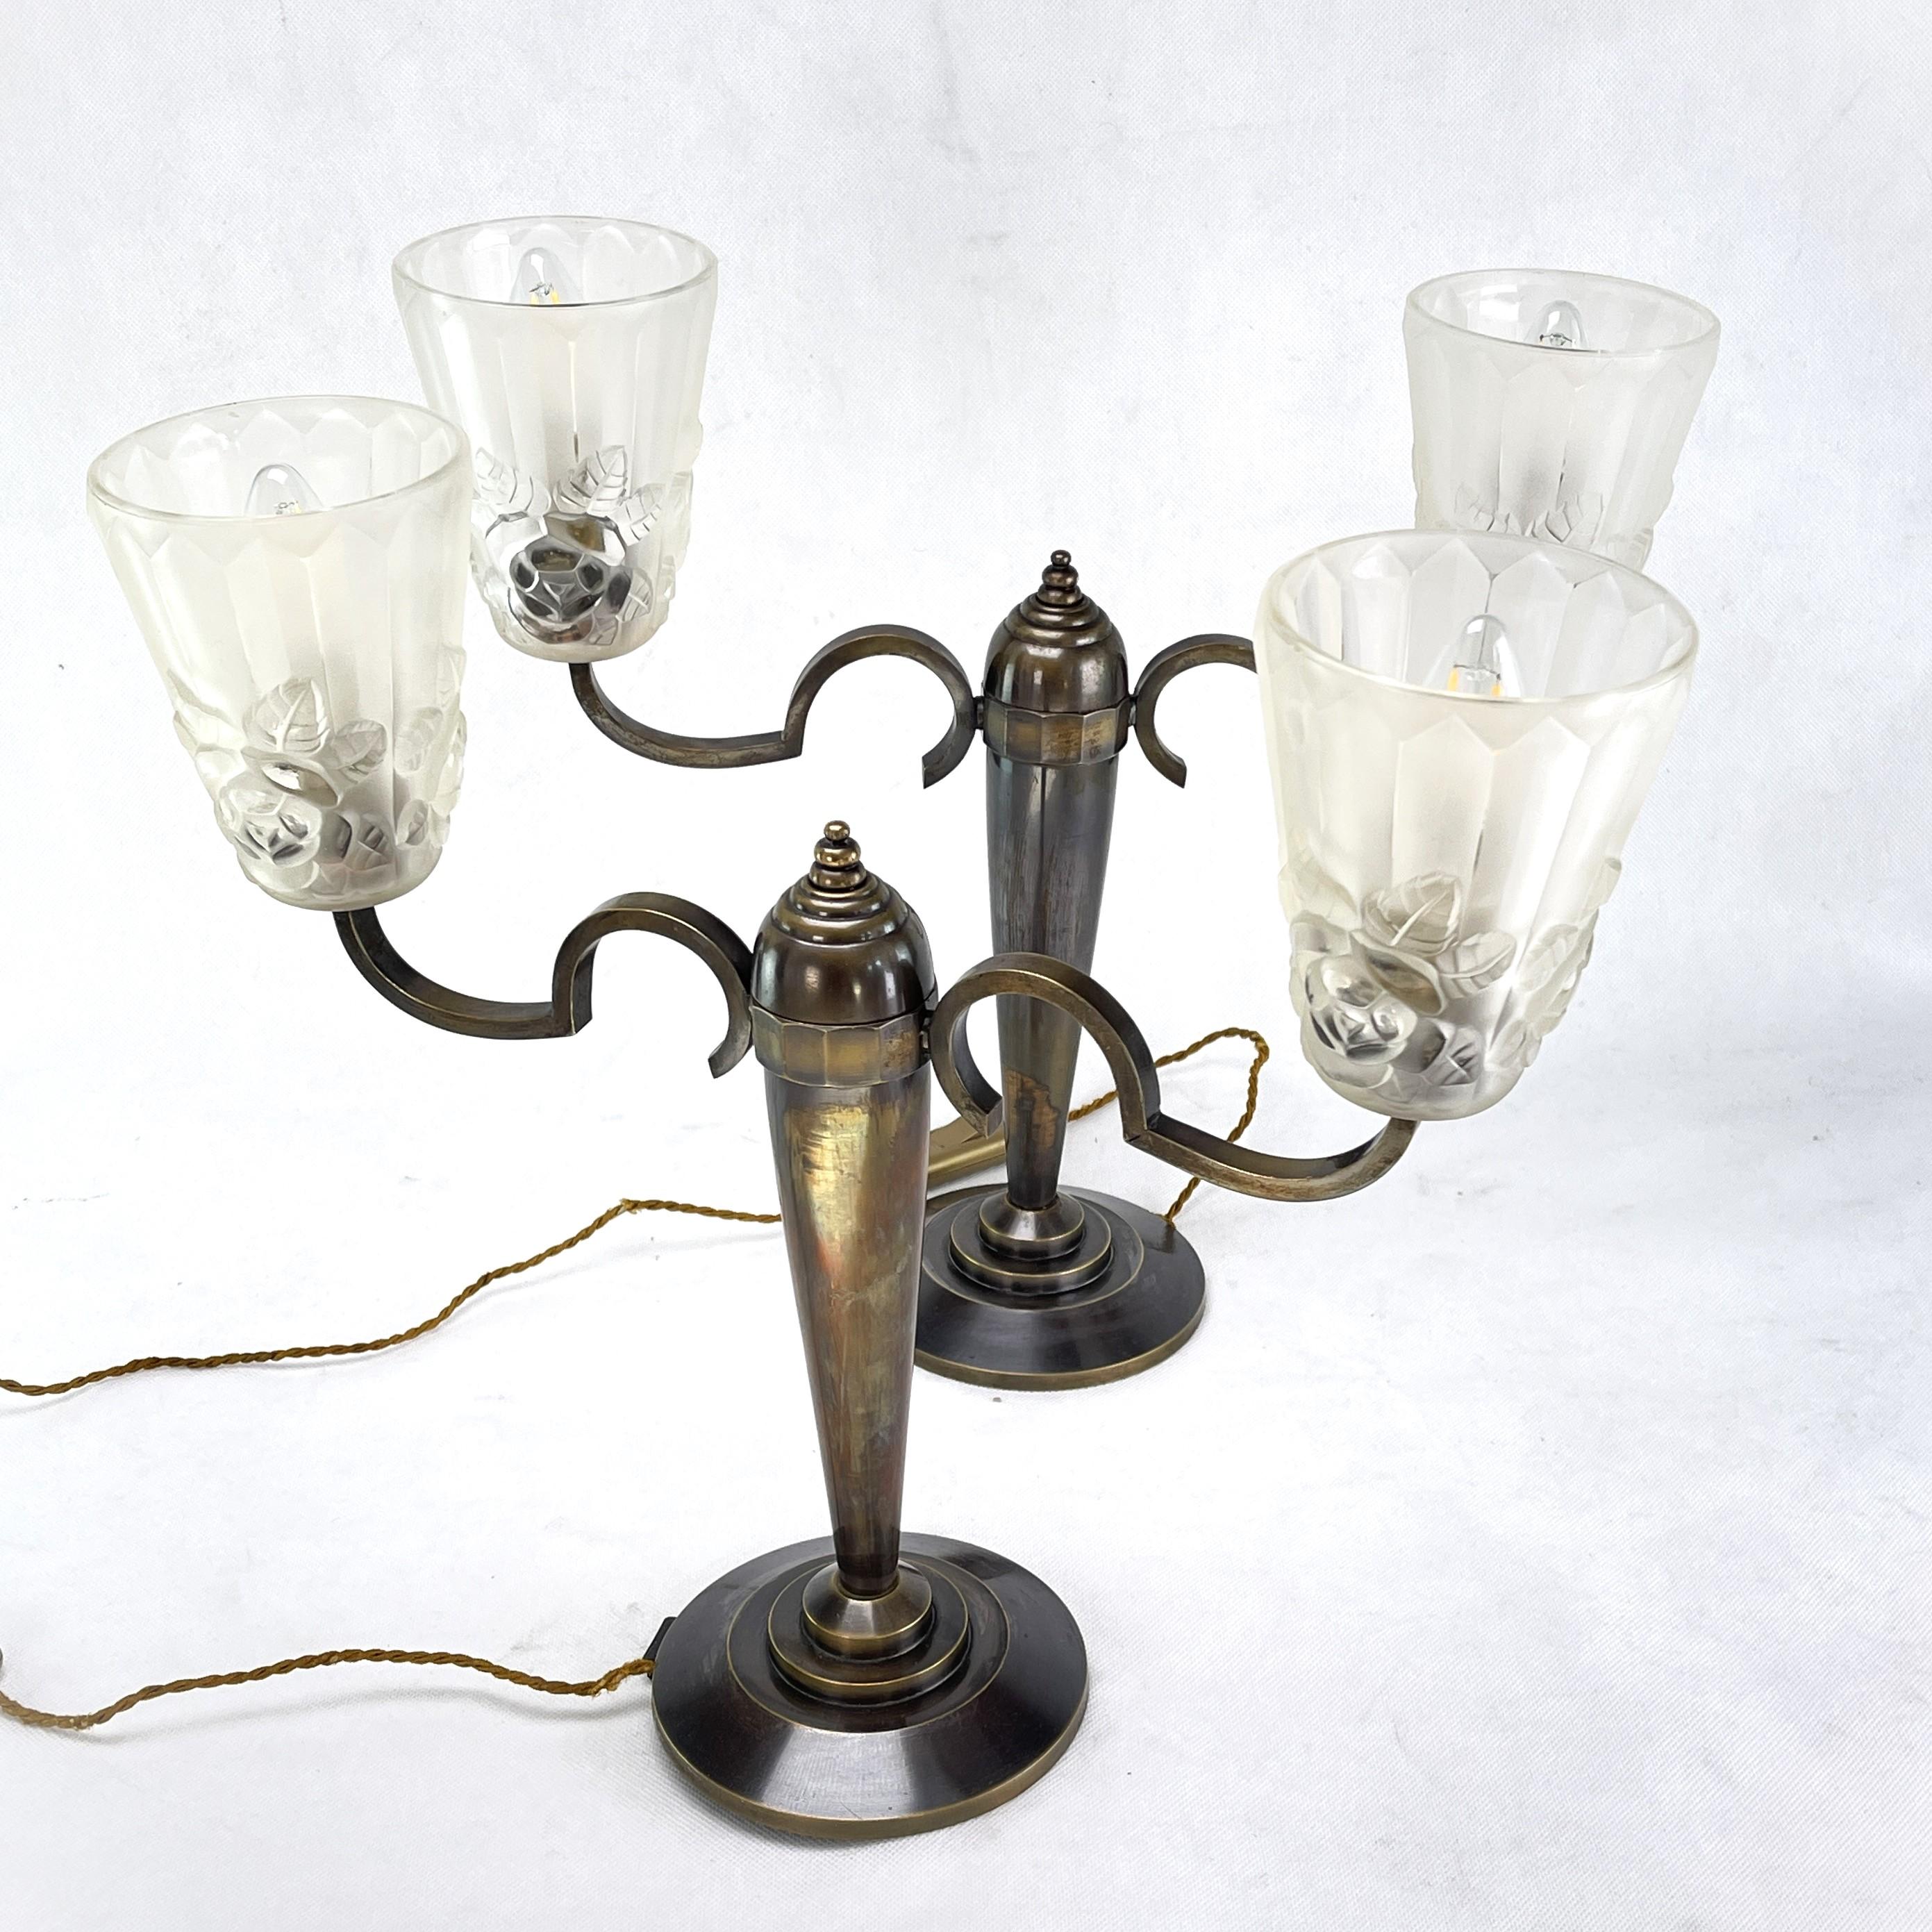 2 Art Deco table lamps with Degué glasses - 1940s

These two signed lamps are a design classic from the 1930s/40s. The imposing lamps are original and provide a pleasant light.

Each cleaned item has 2 x B22 socket and weights 2.2 kg / 4.85 lbs.